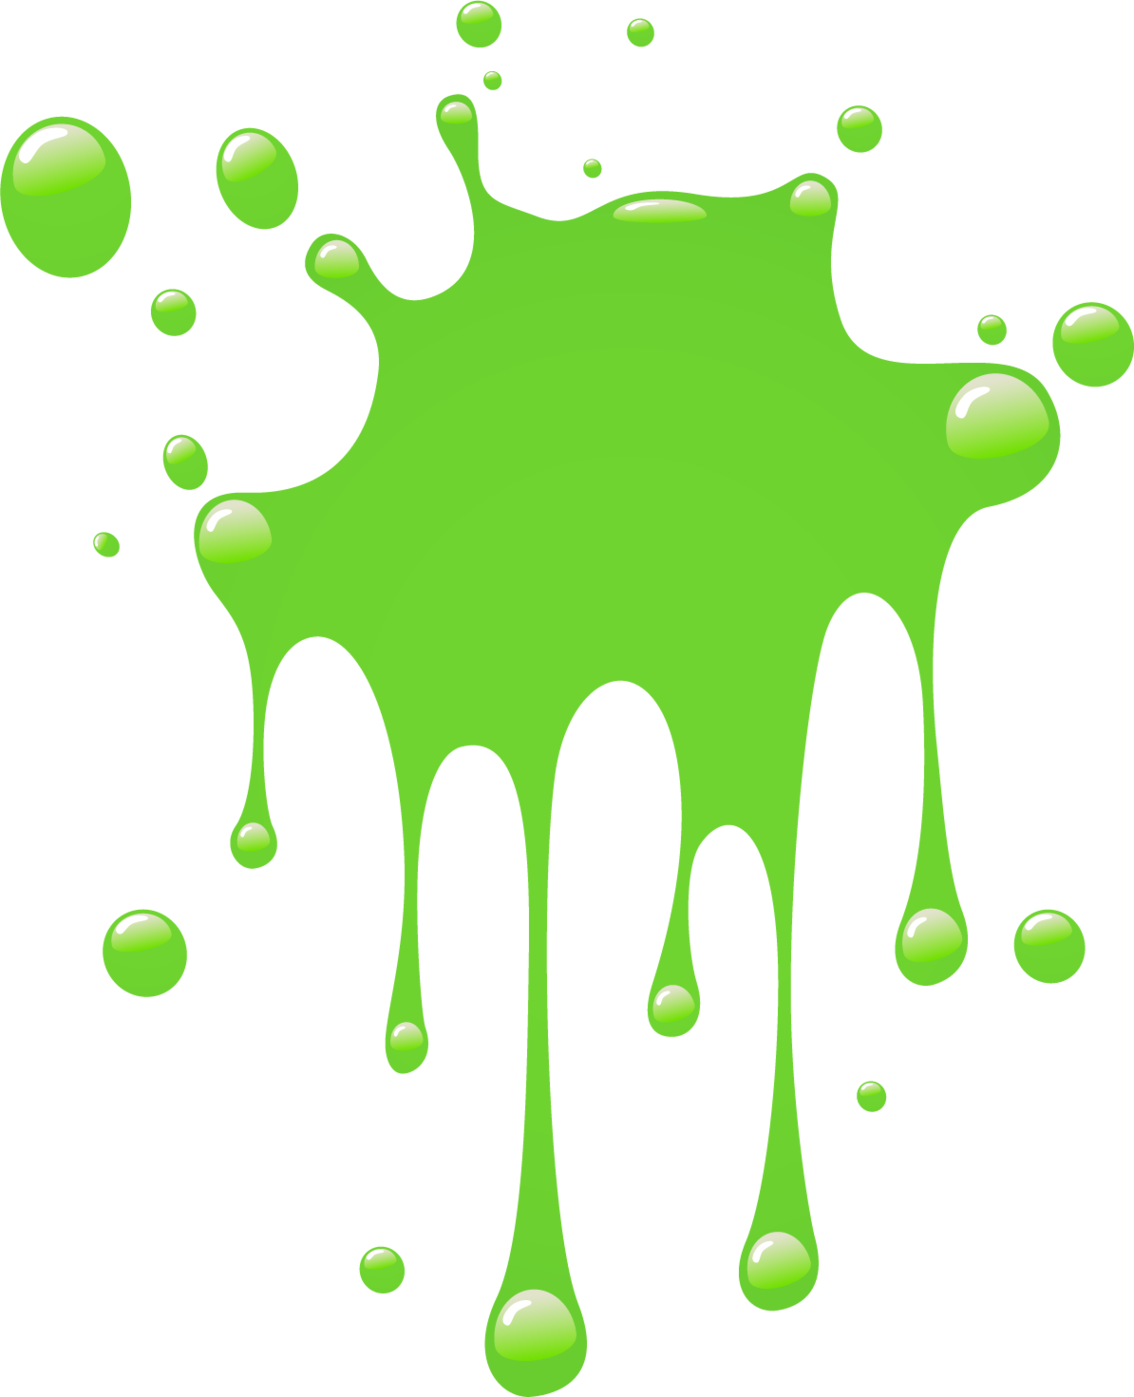 Green Splat Paint Clipart - Free to use Clip Art Resource